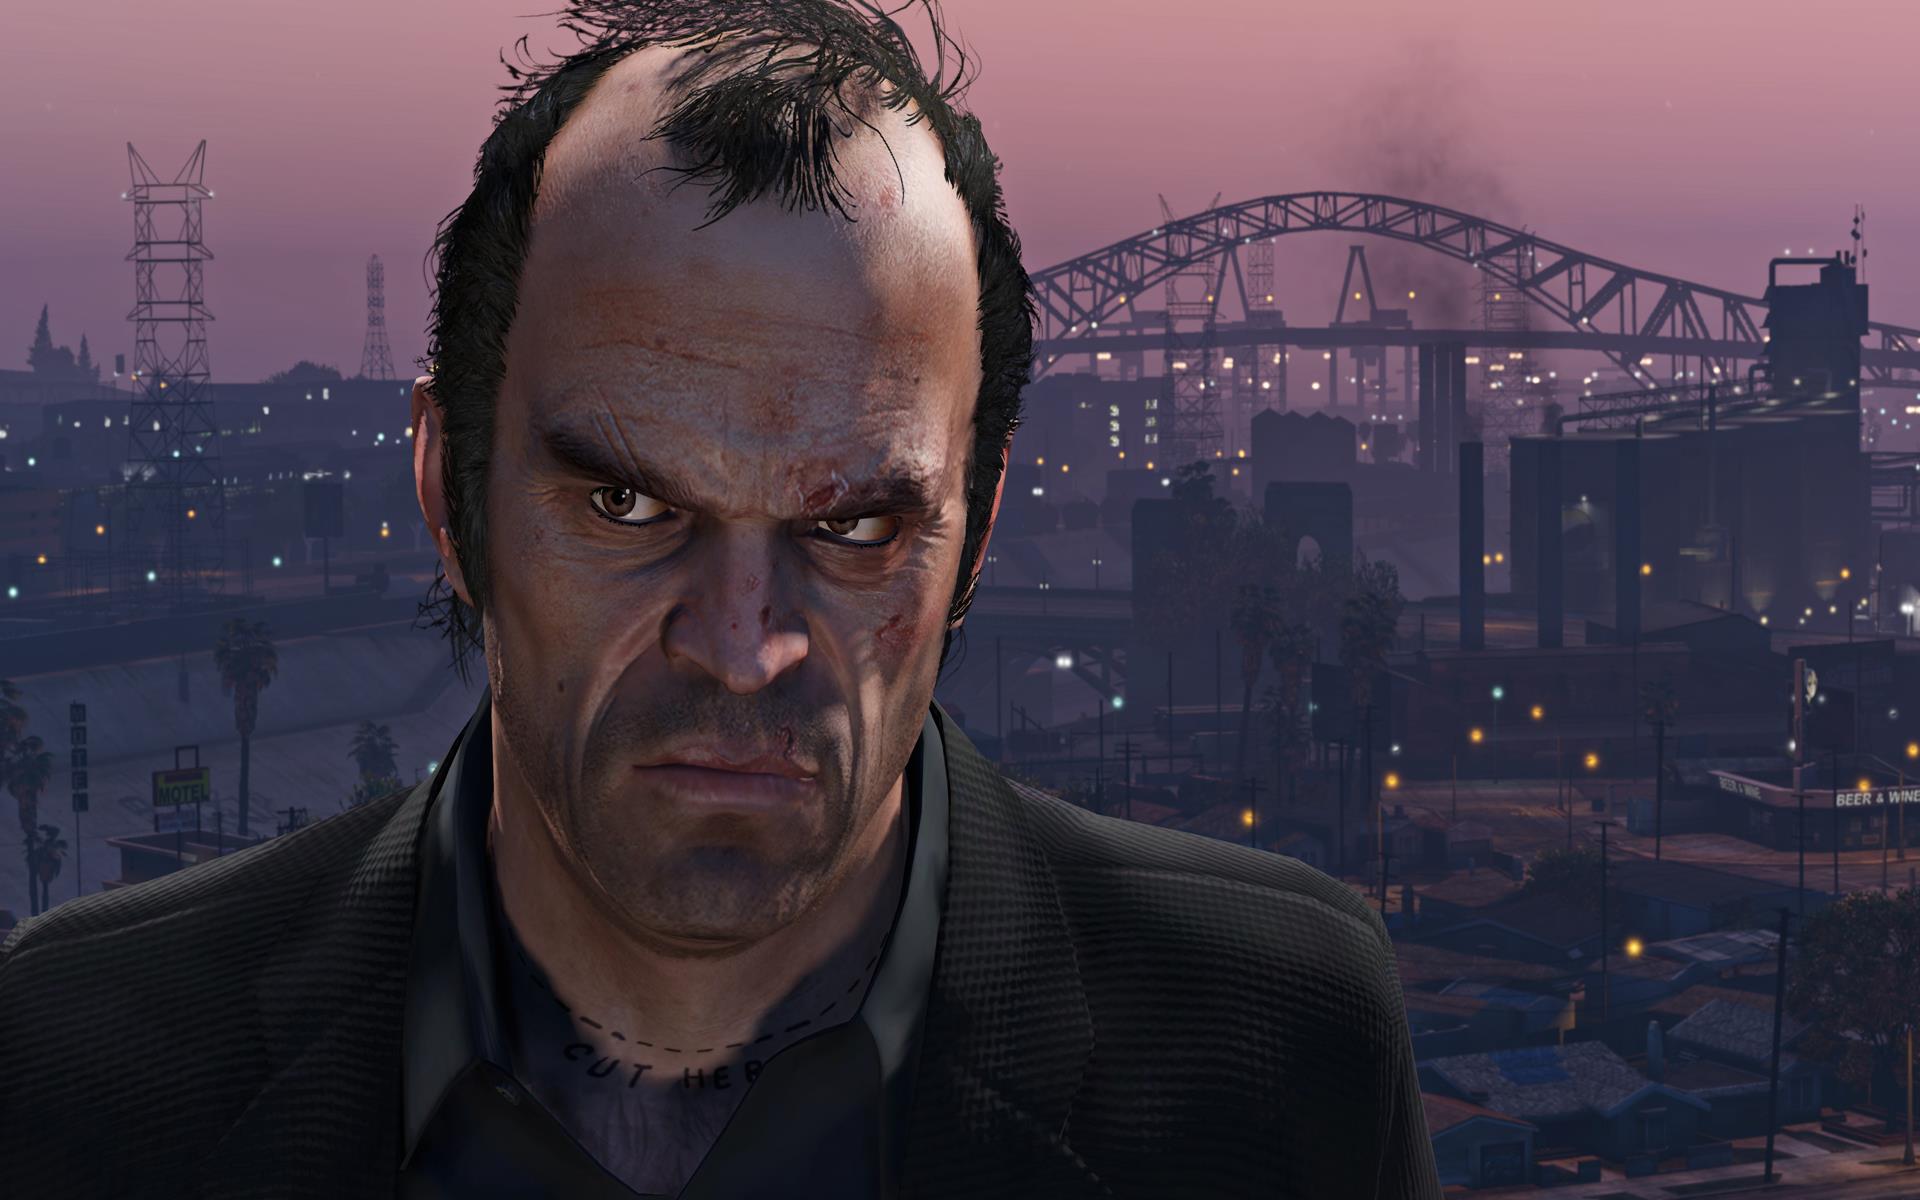 Image for GTA movie "pretty well levered", says Paxton